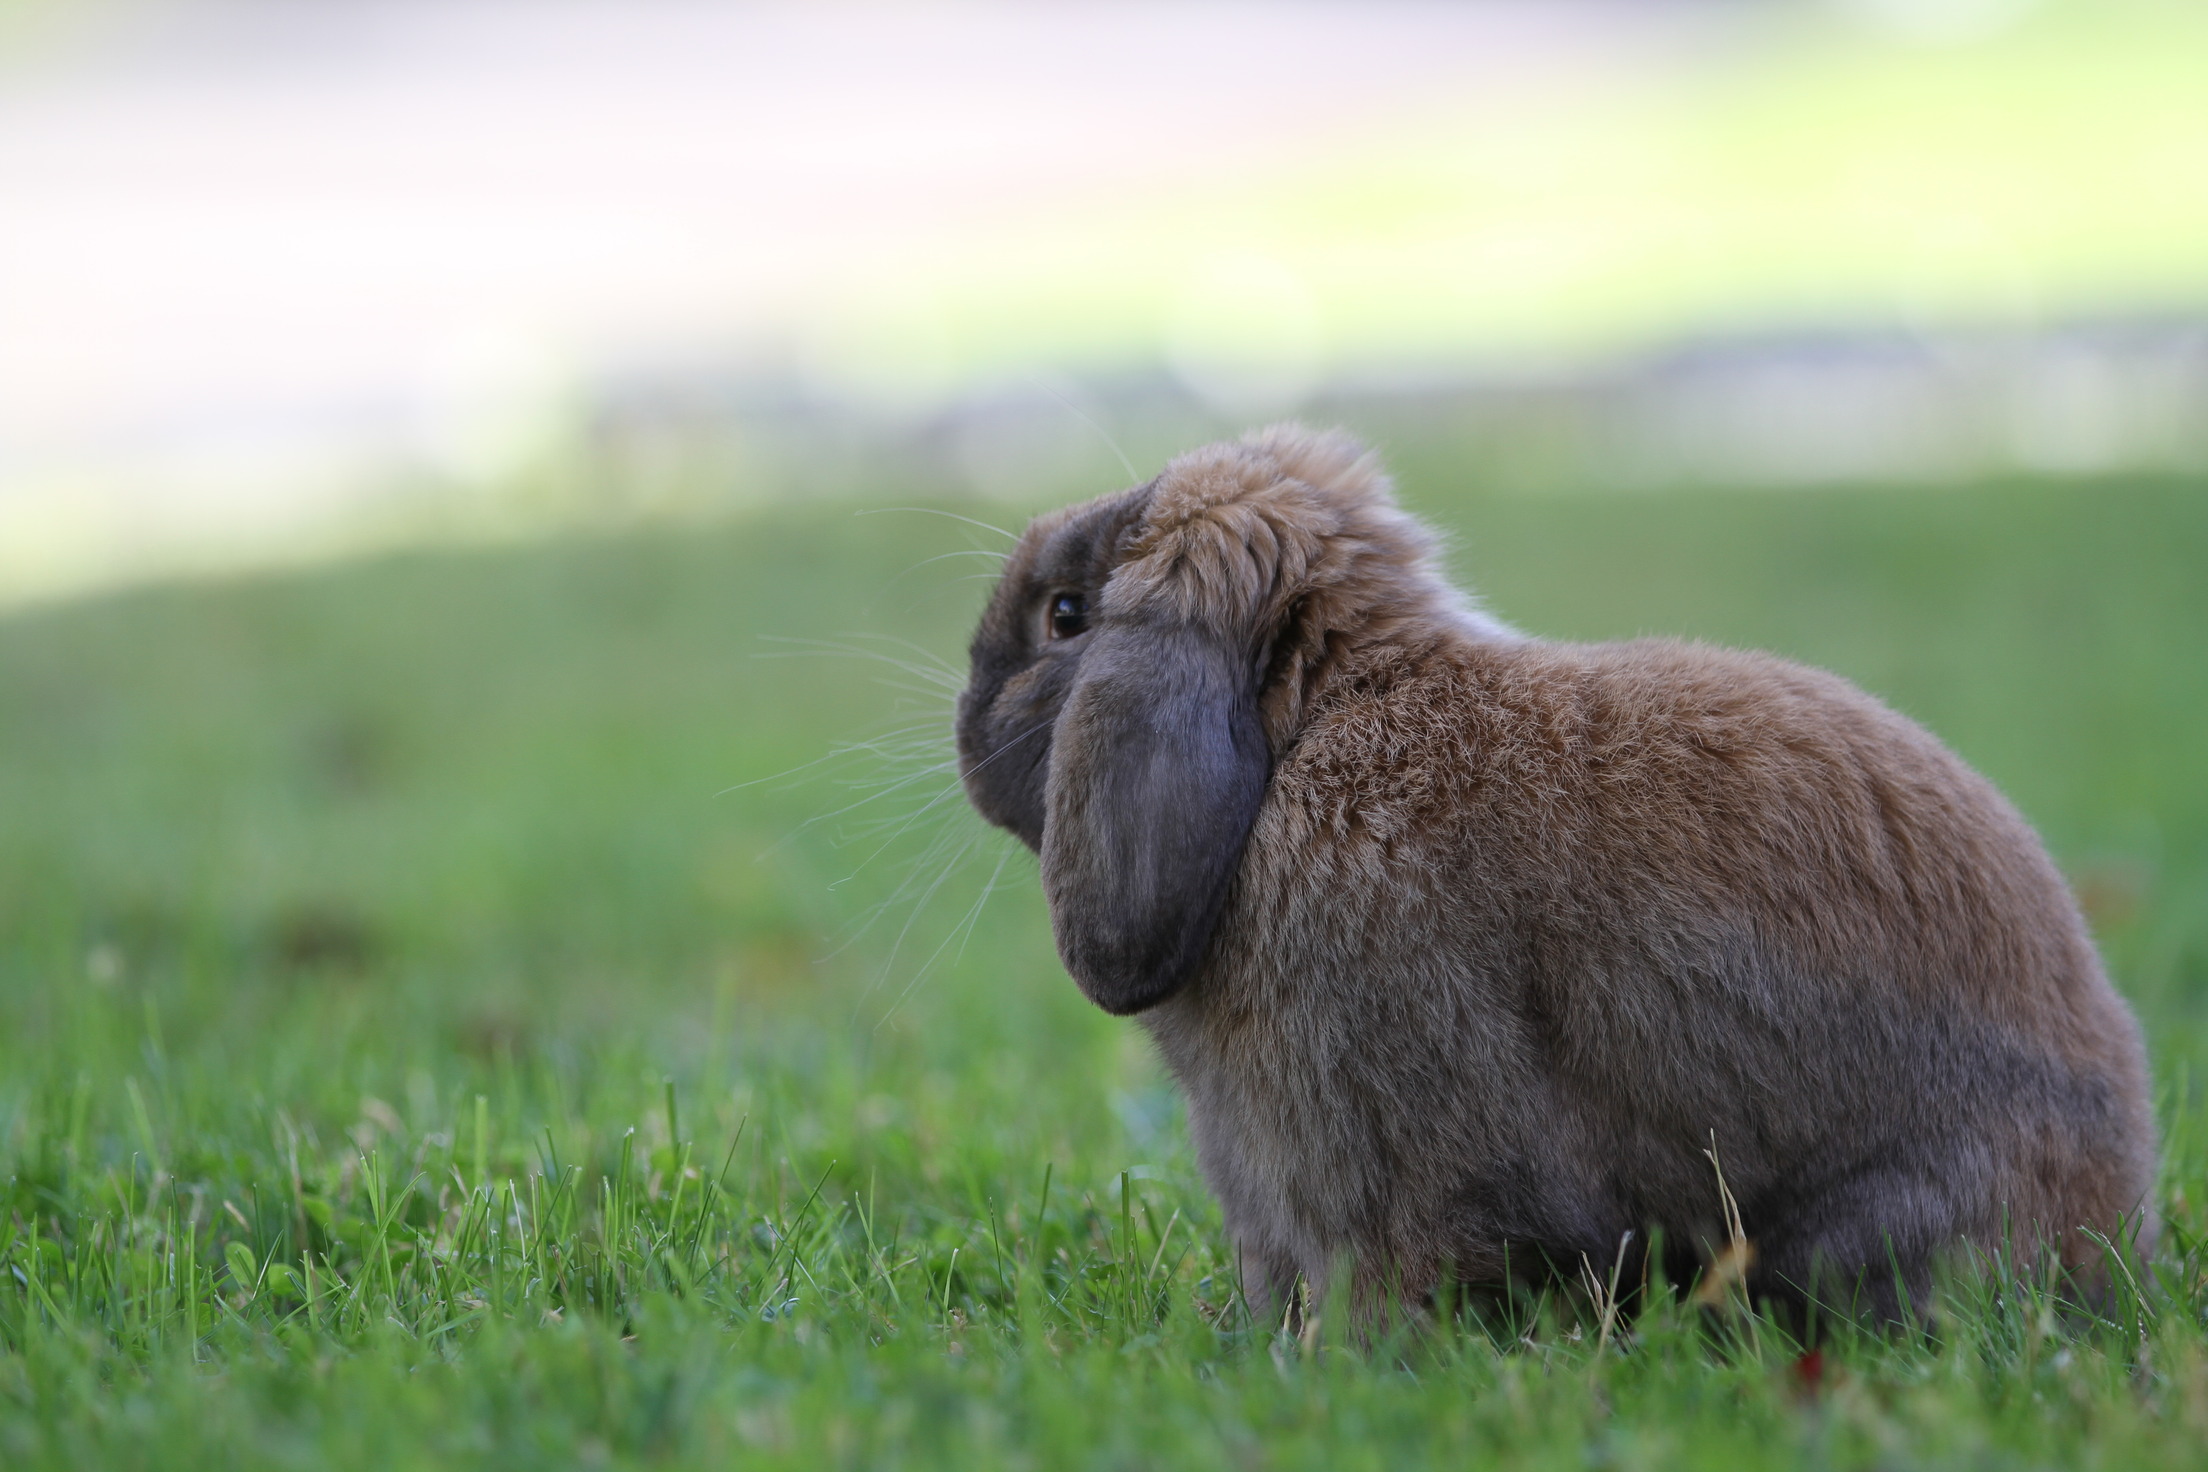 Bunny Contemplates the Yard